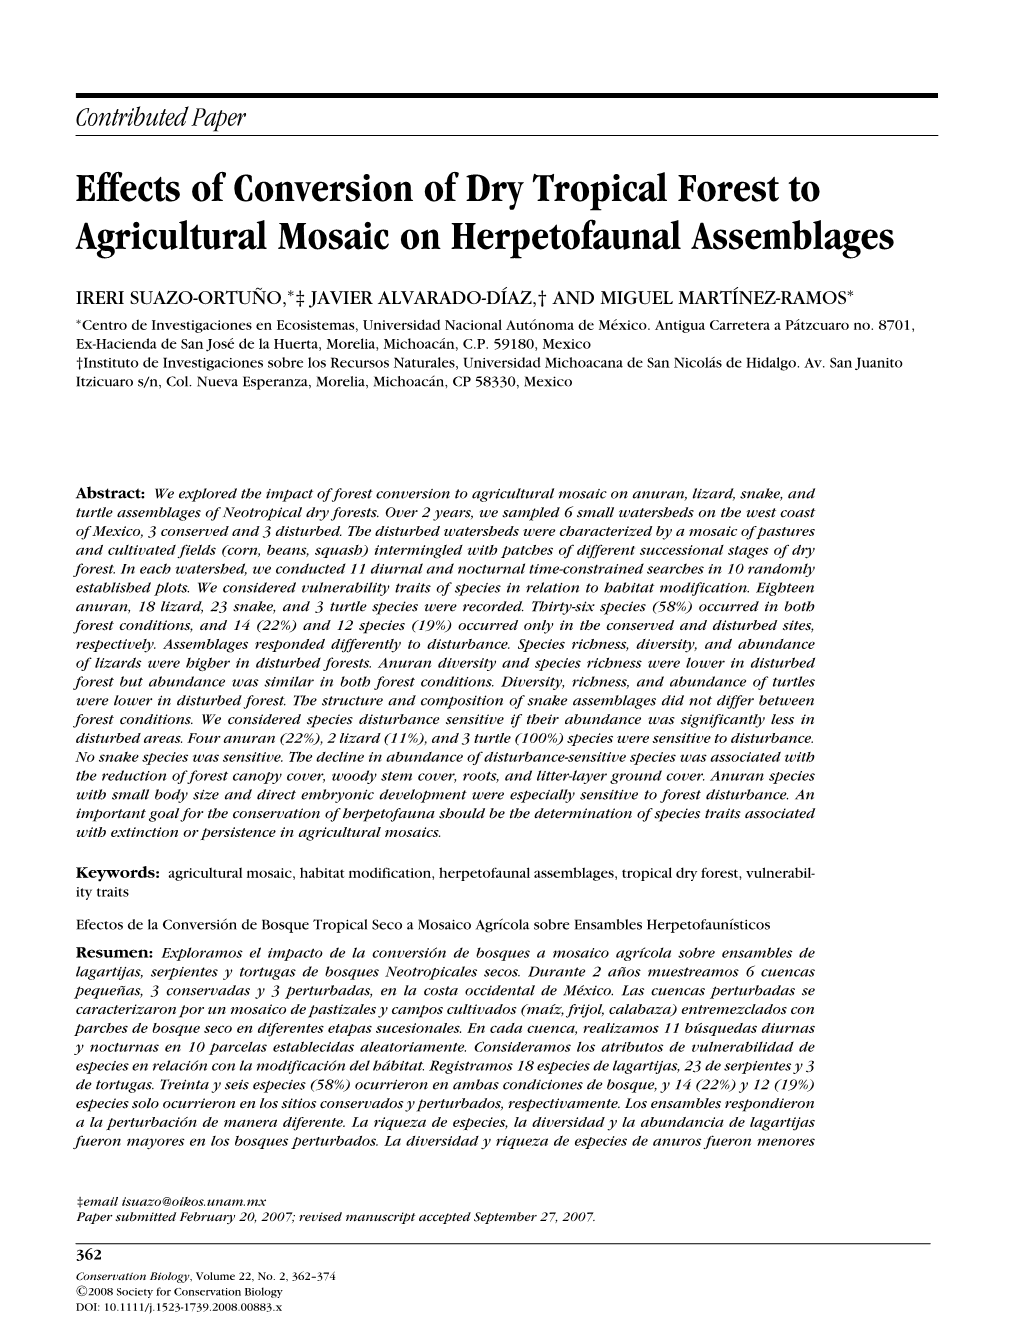 Effects of Conversion of Dry Tropical Forest to Agricultural Mosaic on Herpetofaunal Assemblages